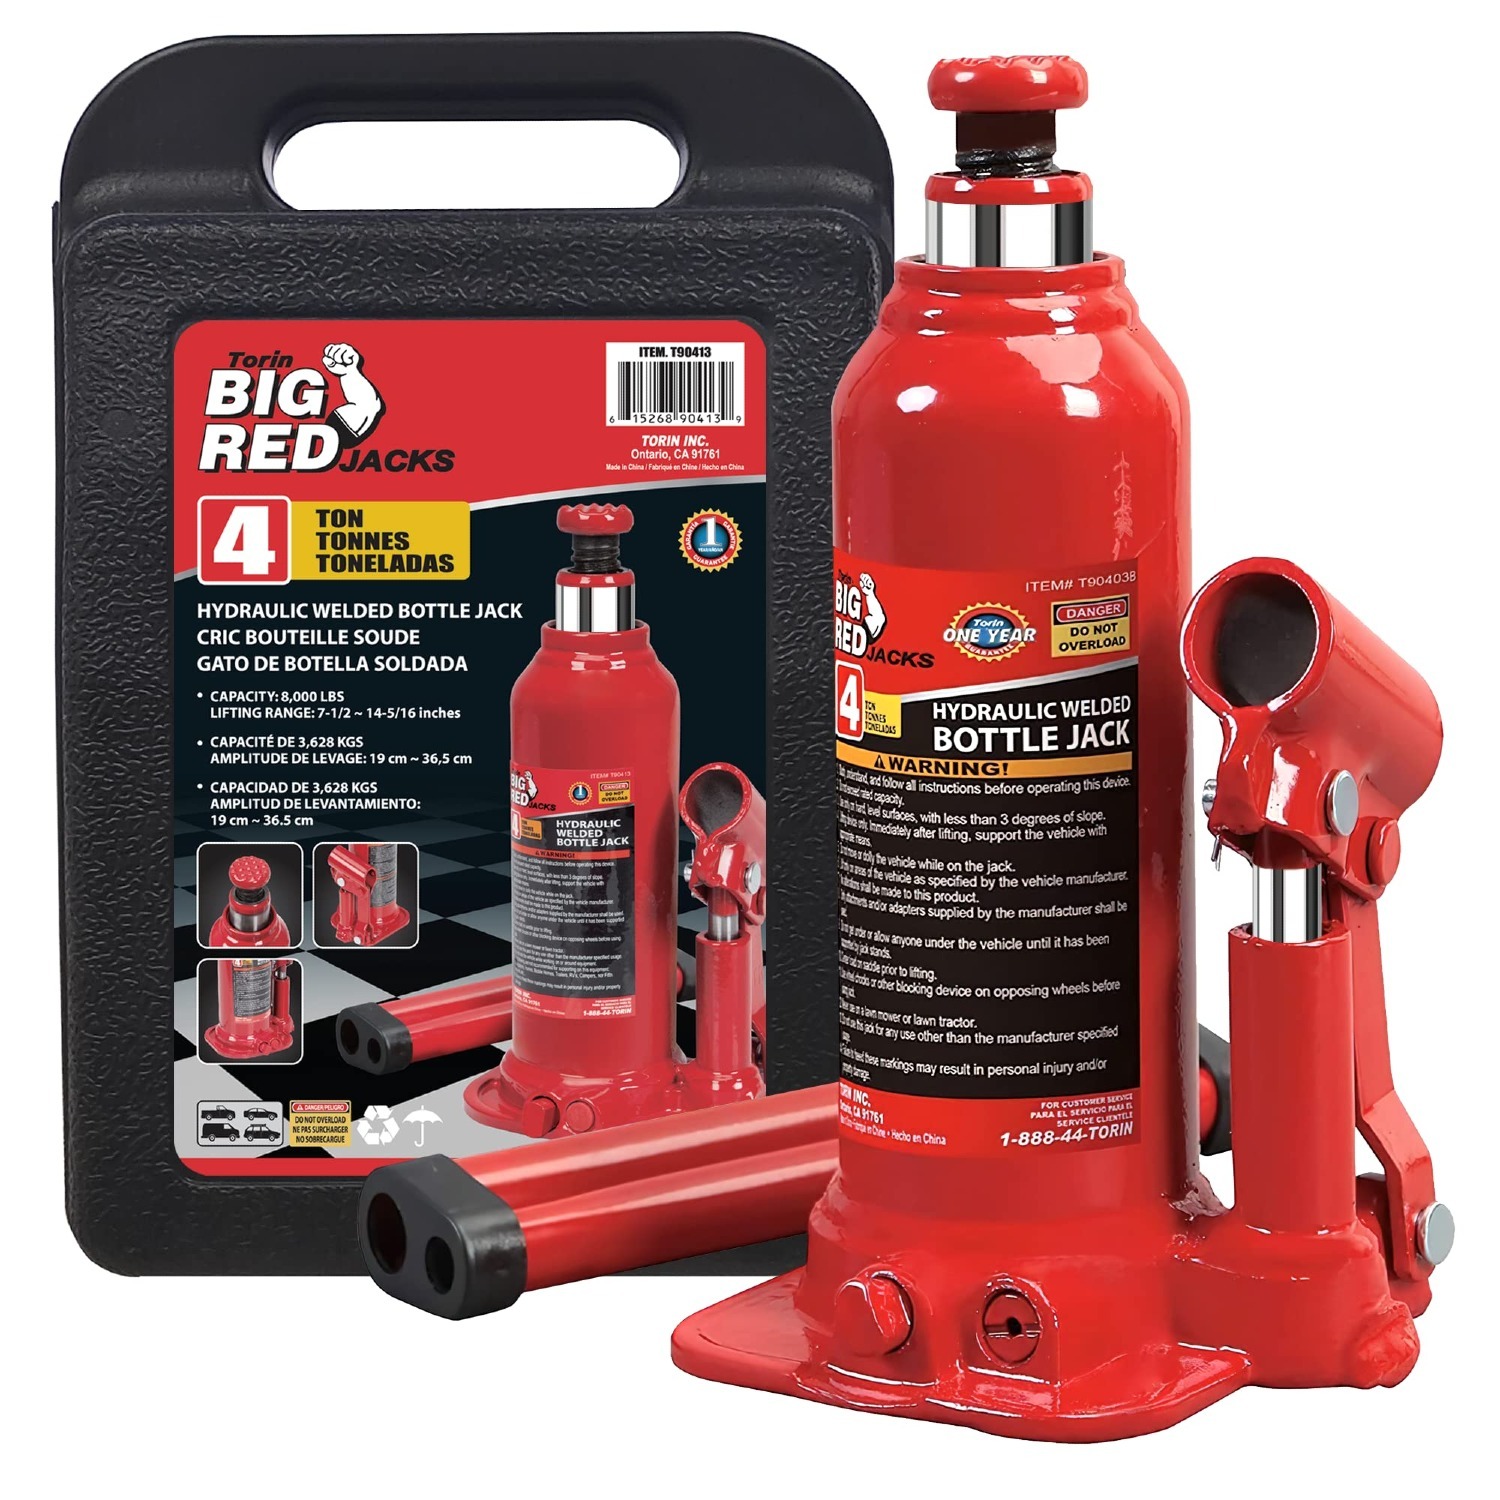 BIG RED 4 Ton (8,000 lb) Capacity Hydraulic Bottle Car Jack (Red, TAM90413) $23.38 + Free Shipping w/ Prime